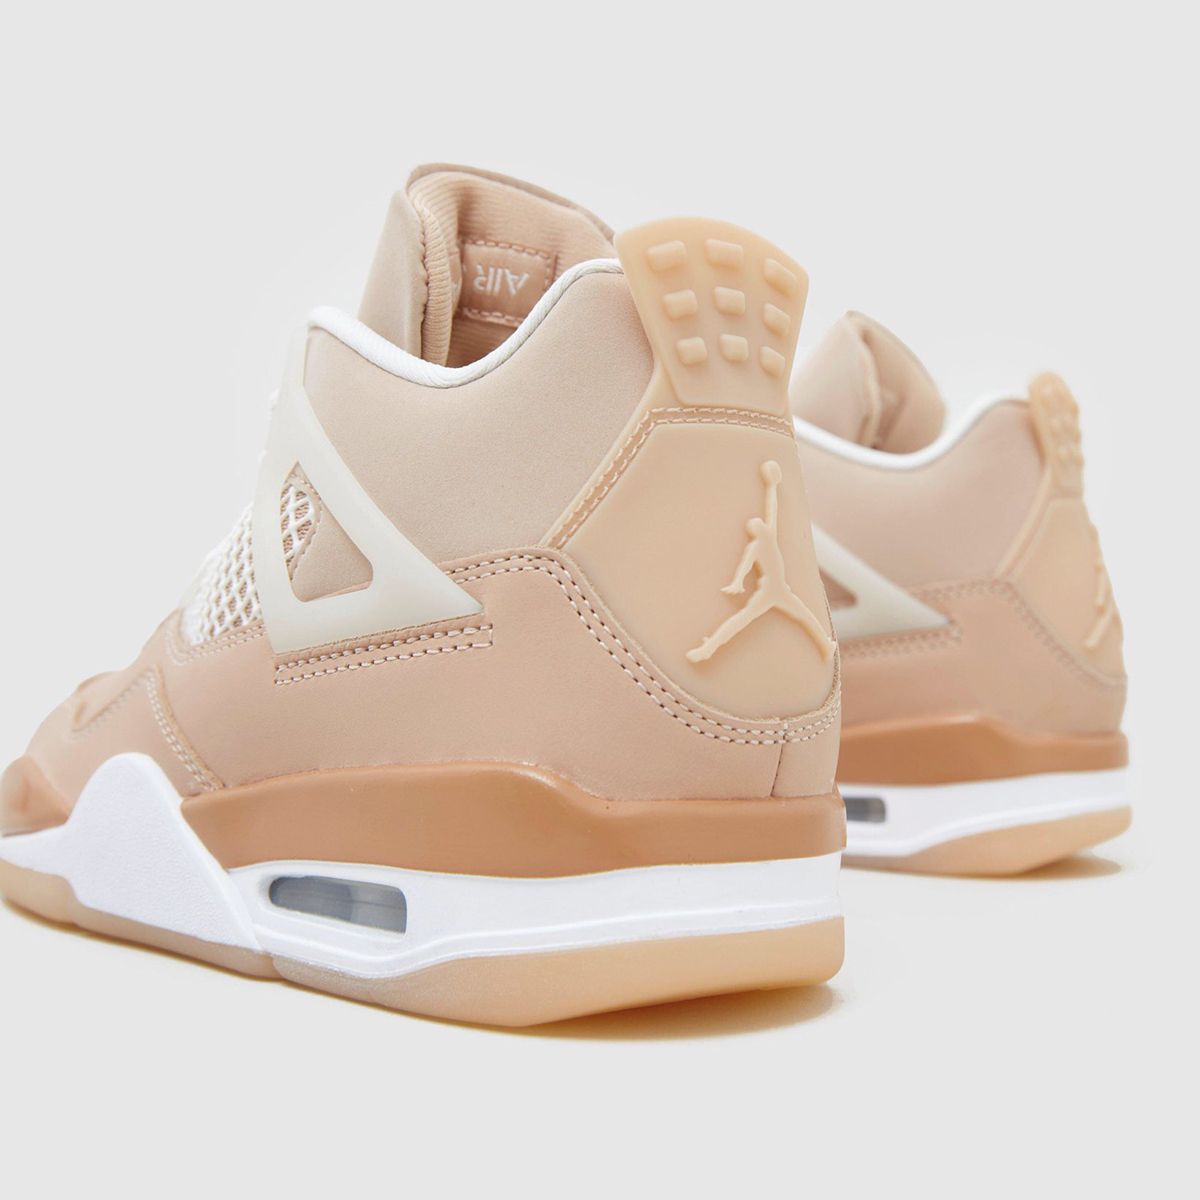 Where to Buy the Air Jordan 4 “Shimmer” | House of Heat°